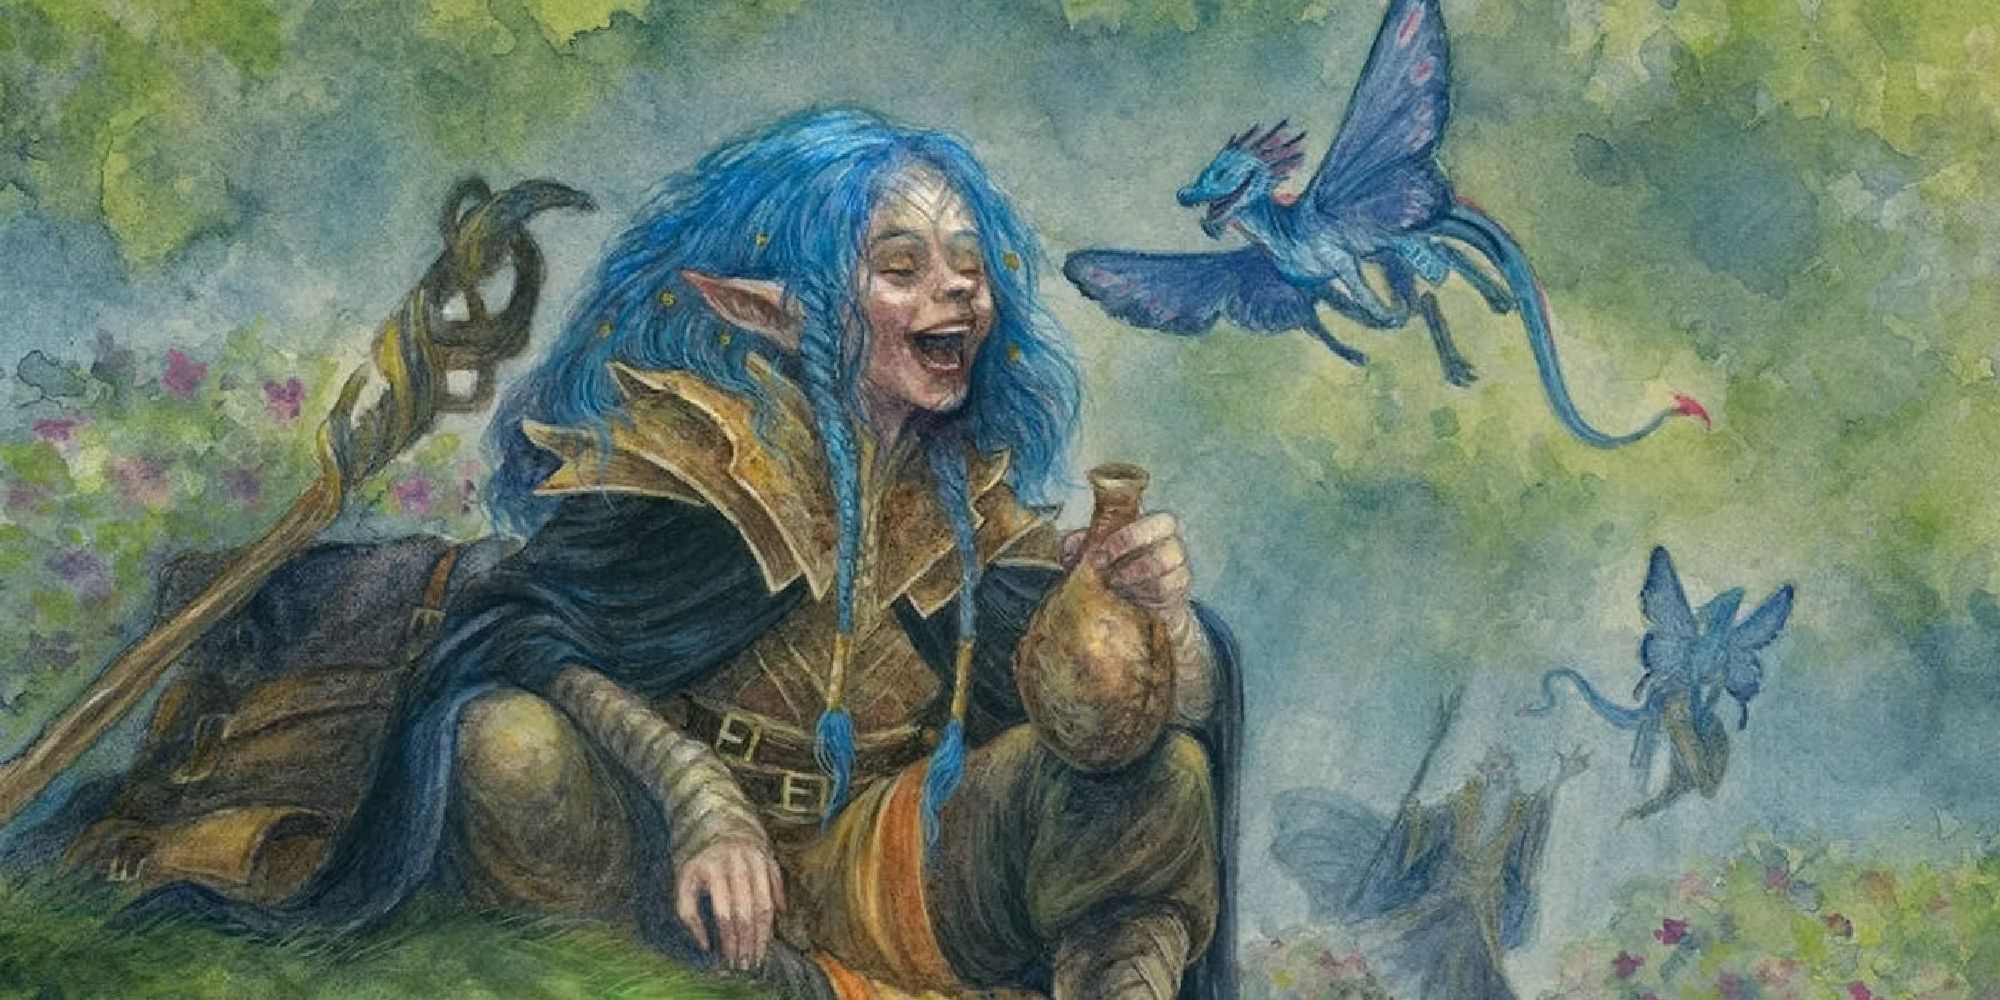 A fey sharing laughs with some pseudodragons